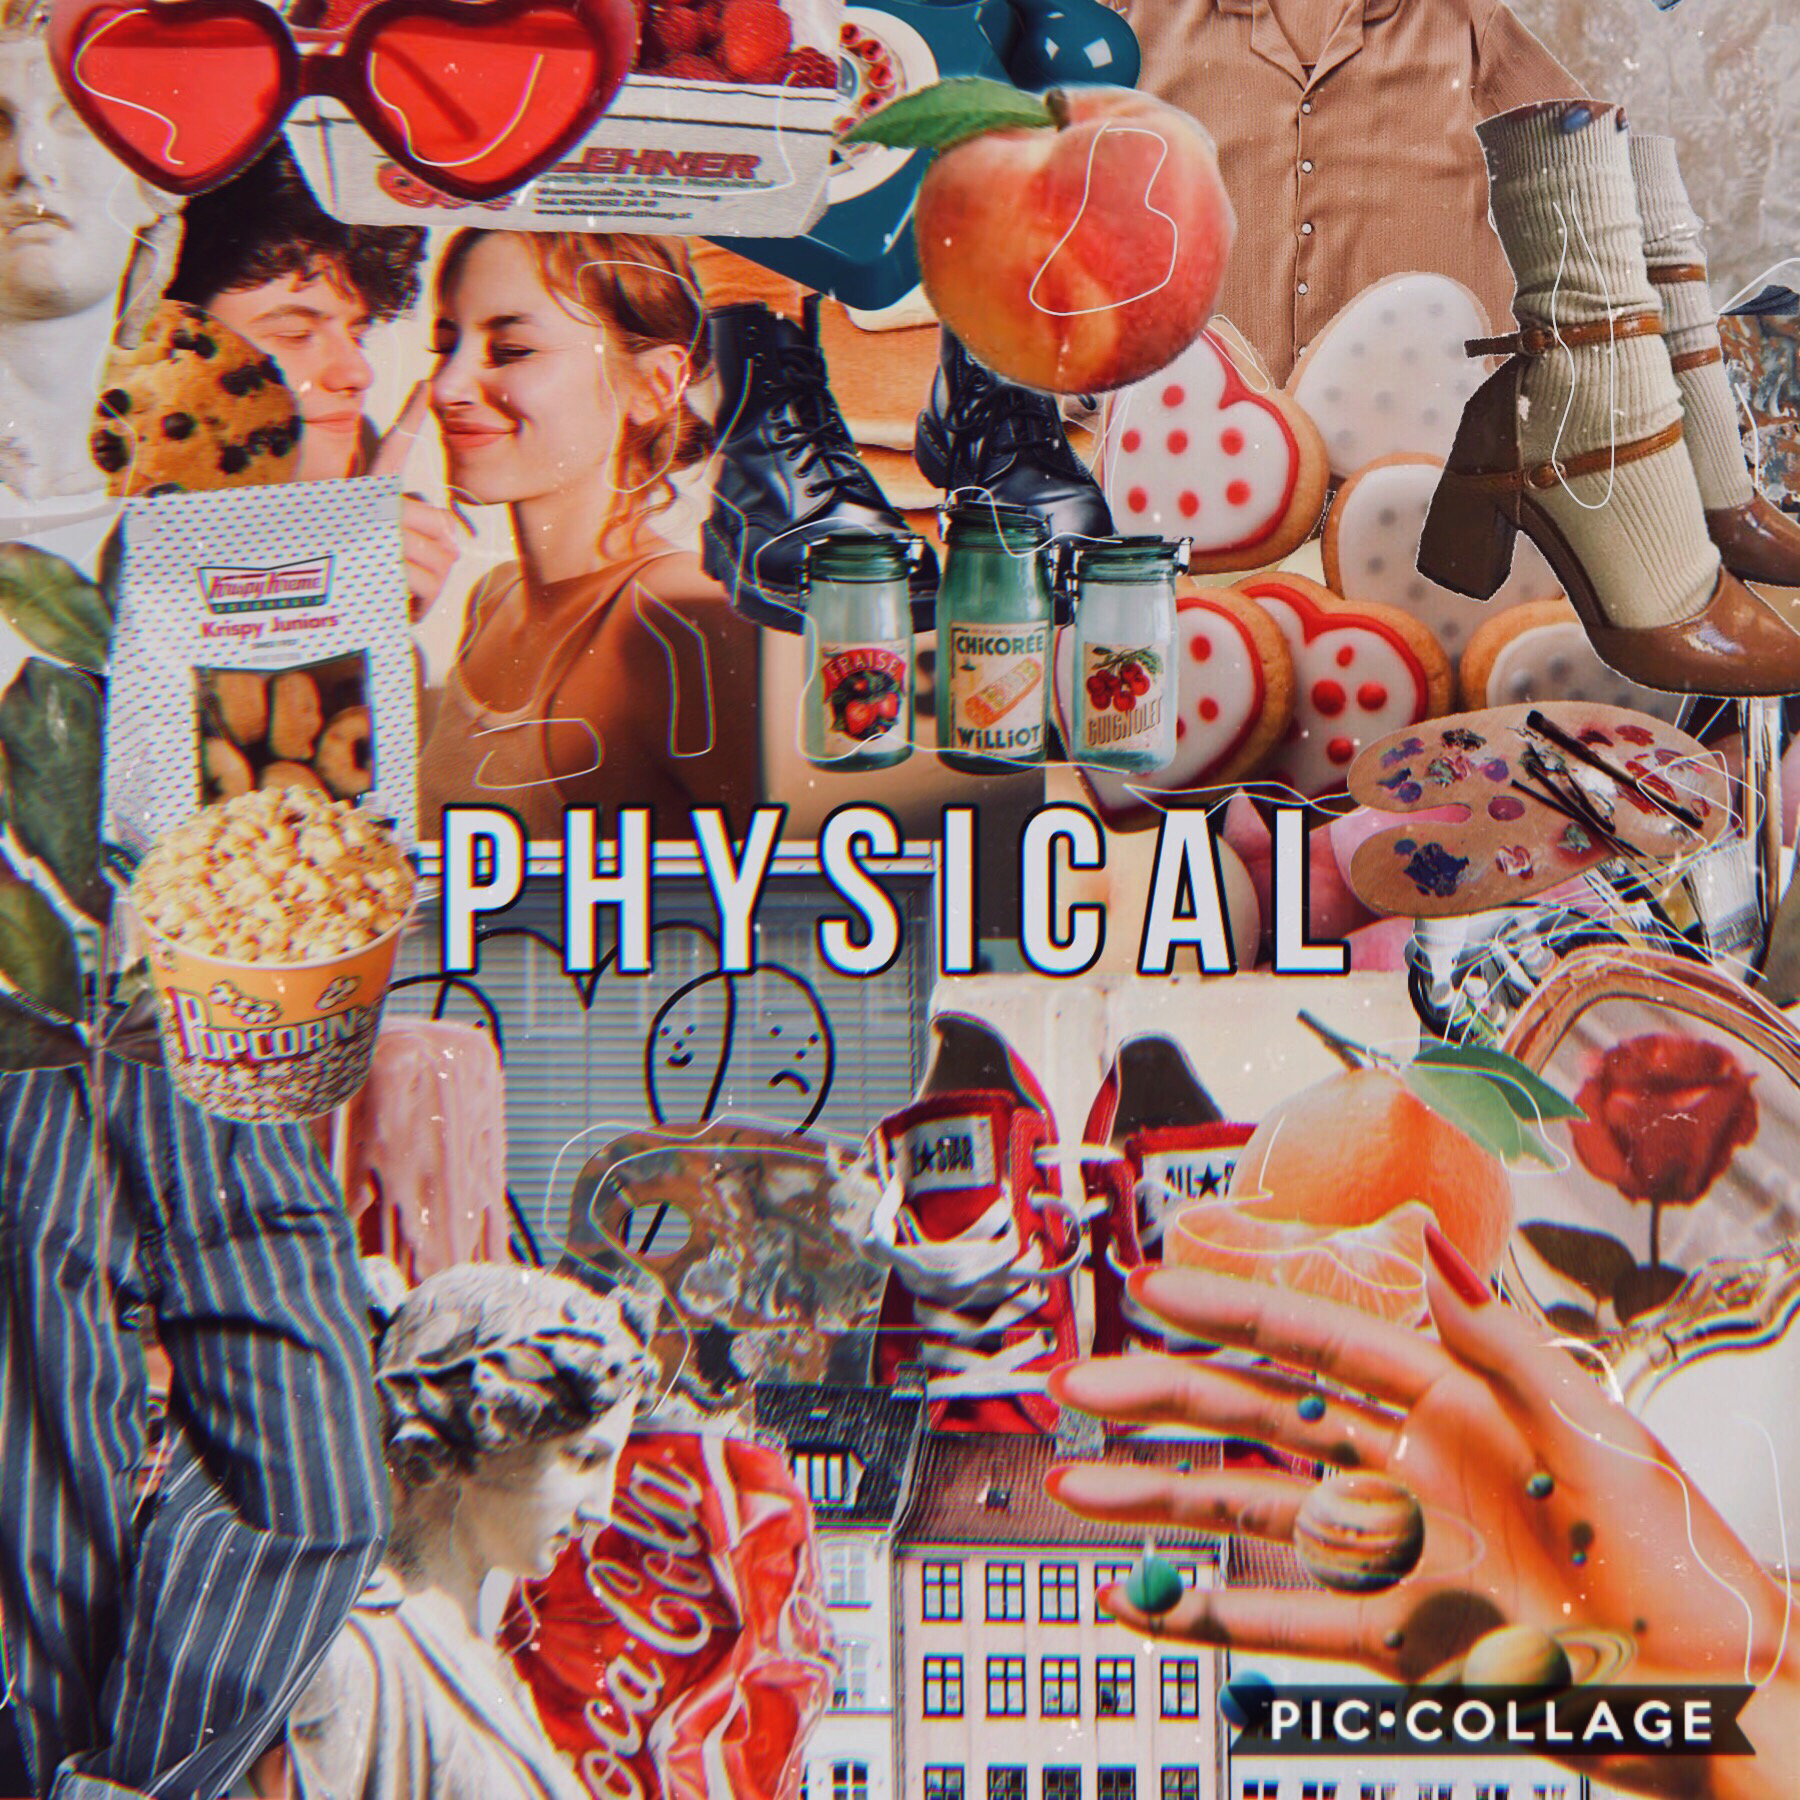 🍄💧tap !! 💧🍄
☁️ hey ik this collage says physical but pls don’t be physical w others practice social distancing 
☁️ ik that times are hard, and it’s strange for all of us, don’t hesitate to reach out to me to talk, ily
ily all sm, hope u enjoy this 💗